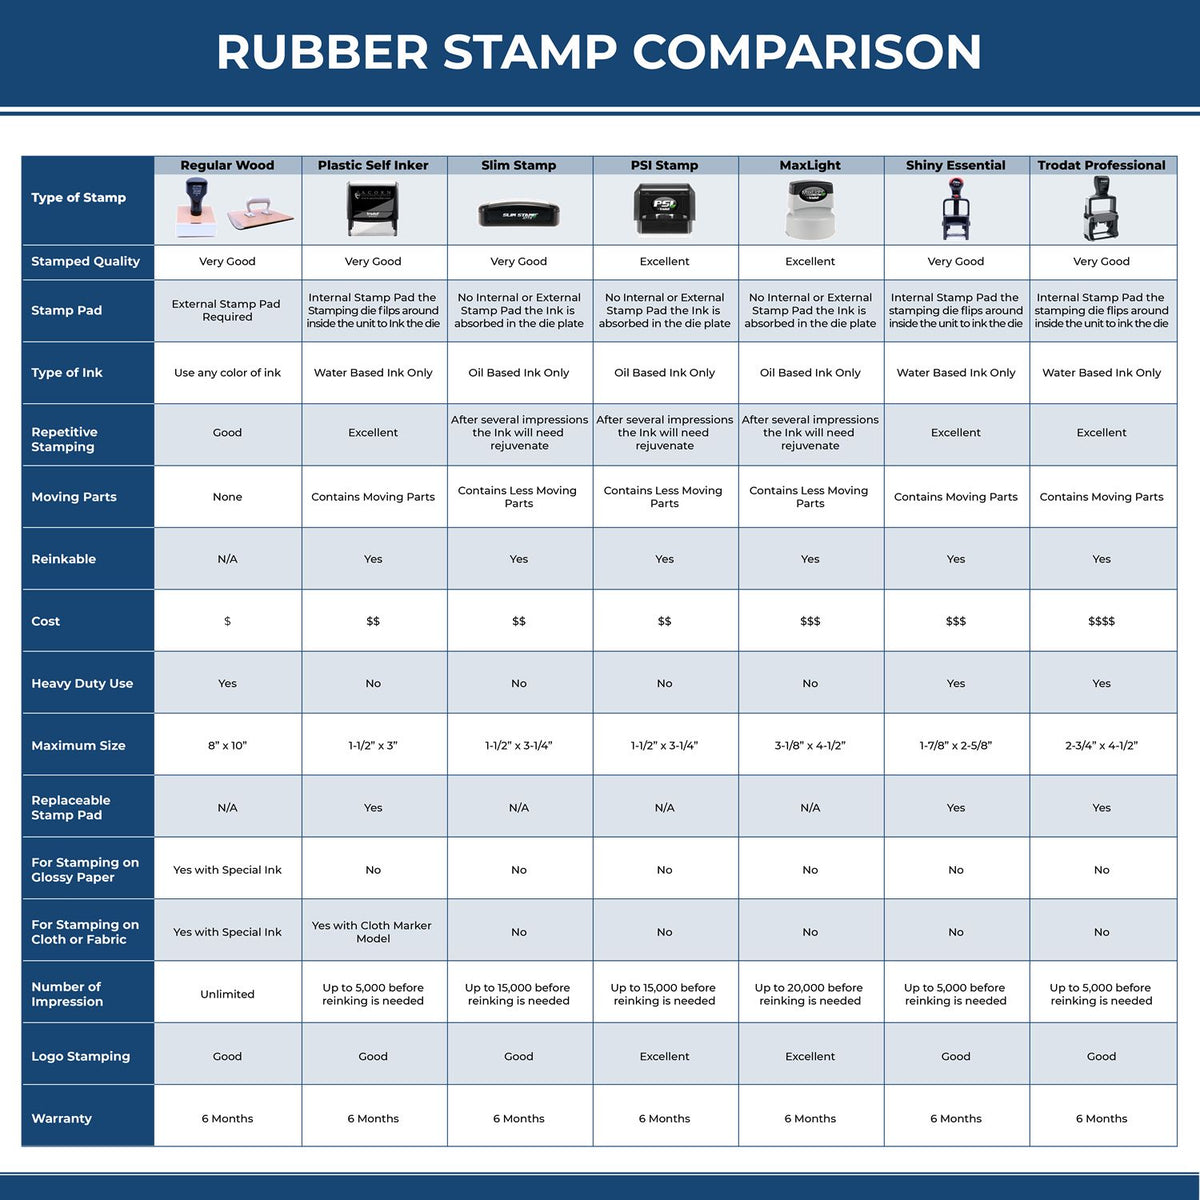 A comparison chart for the different types of mount models available for the Wooden Handle Florida Rectangular Notary Public Stamp.